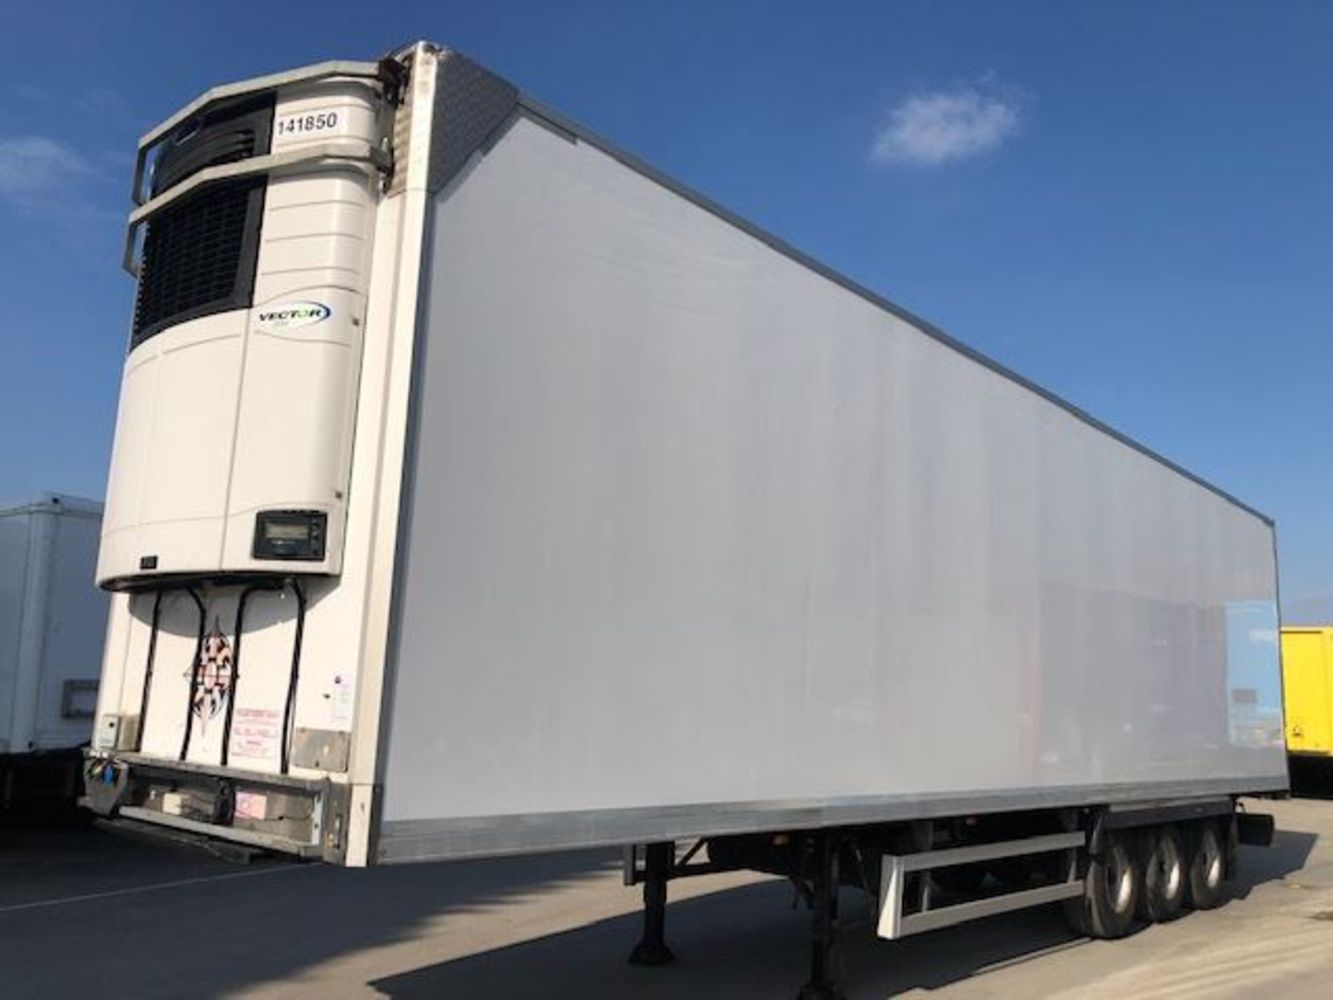 Montracon Fridge Trailers Direct from Finance House - Lifting Second Deck Excellent Selection - Year 2014